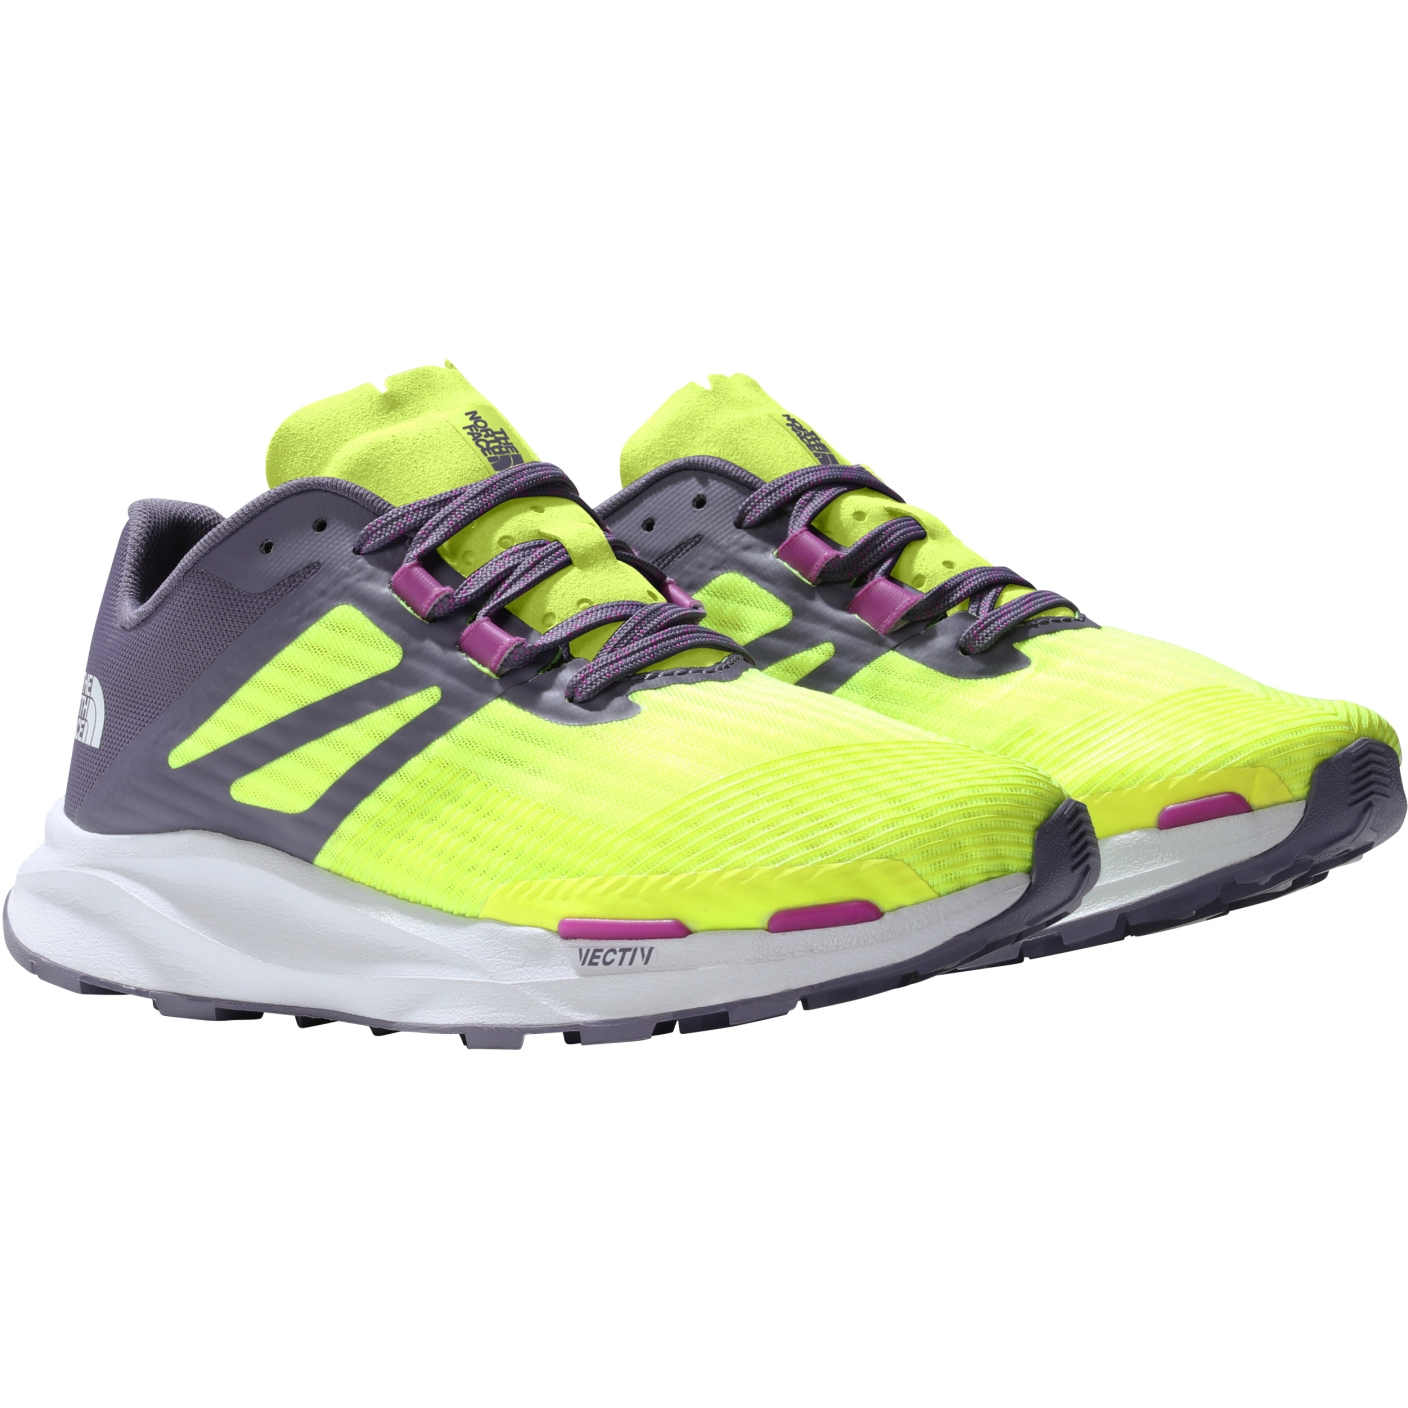 Foto de The North Face Zapatillas Trail Running Mujer - Vectiv™ Eminus - LED Yellow/Lunar Slate